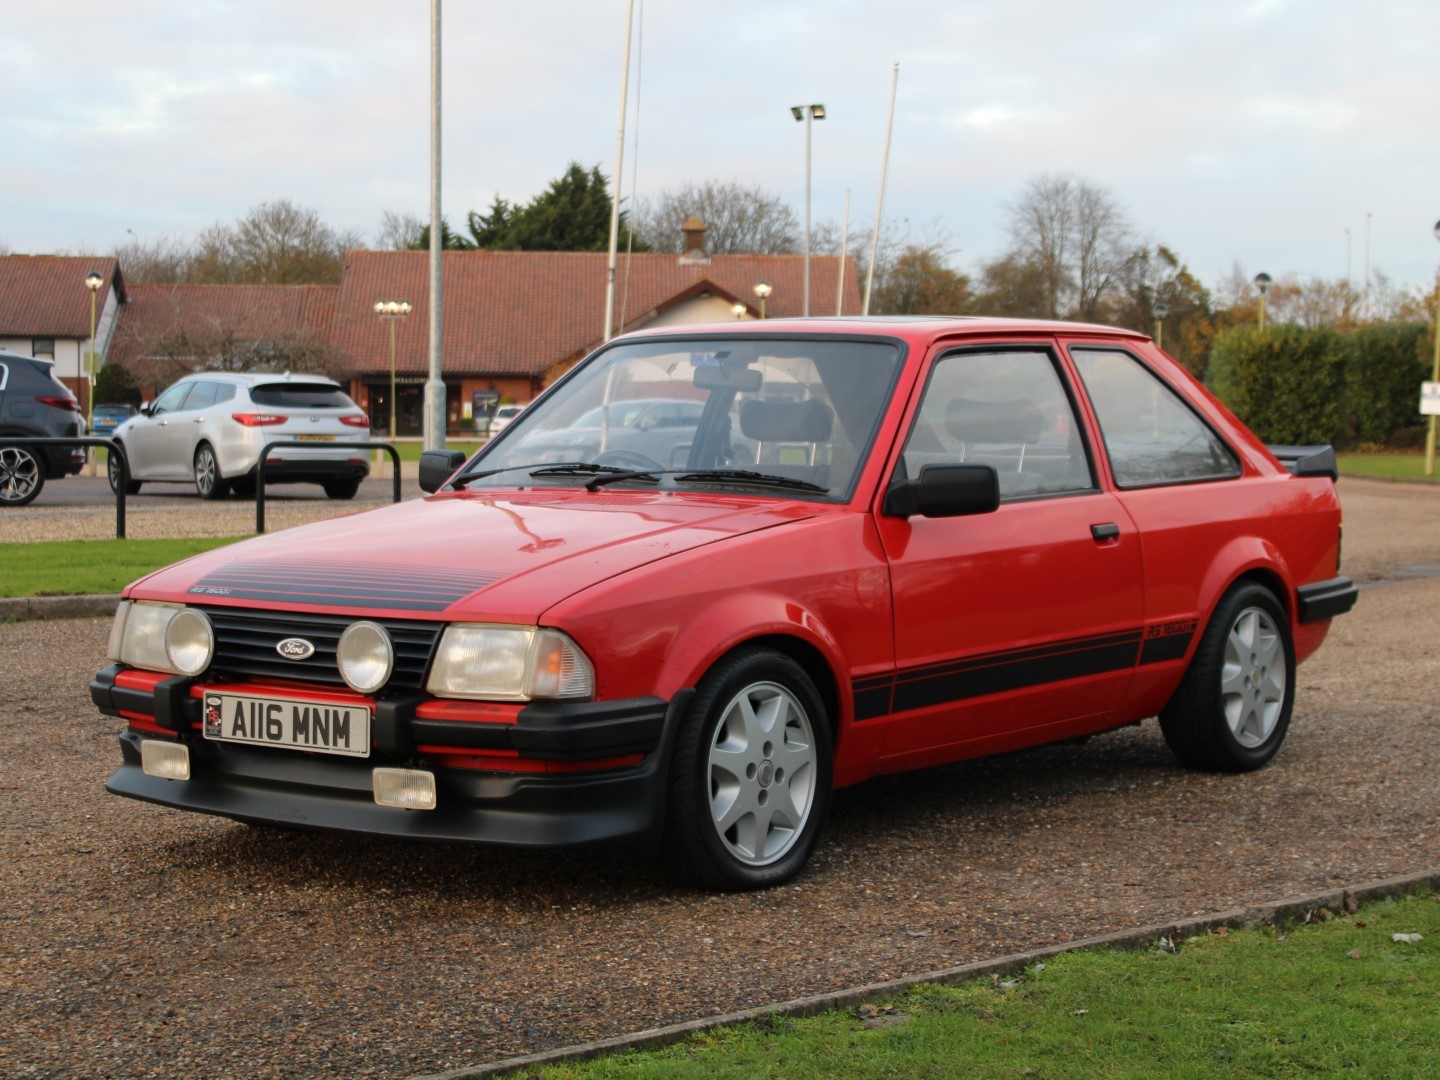 1983 Ford Escort RS 1600i - Image 3 of 24